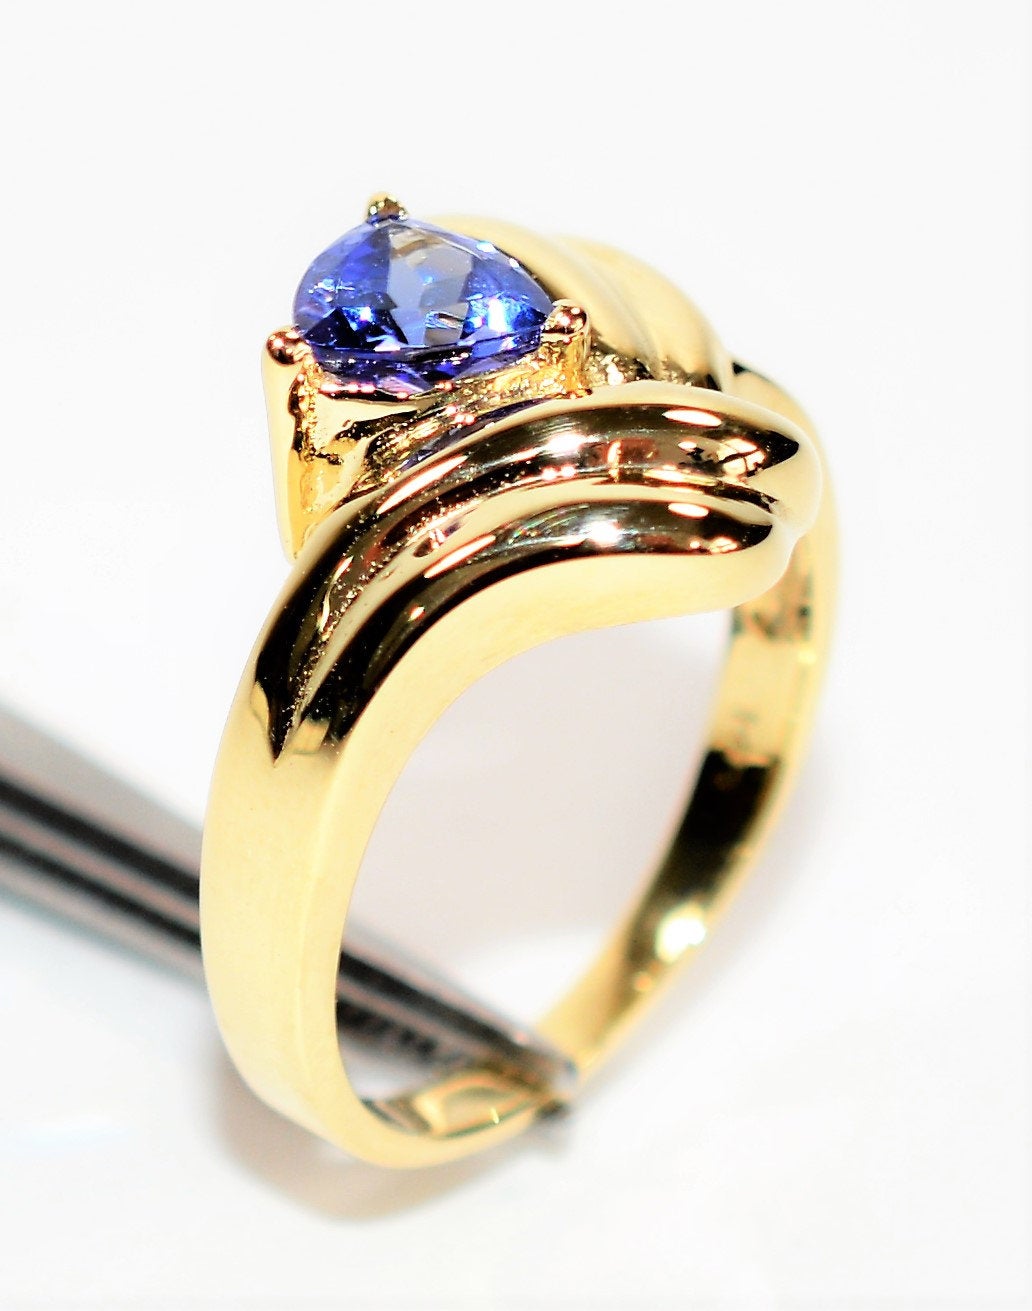 Natural Tanzanite Ring 14K Solid Gold .73ct Solitaire Ring Gemstone Ring Vintage Ring Estate Ring December Birthstone Ring Jewellery Jewelry